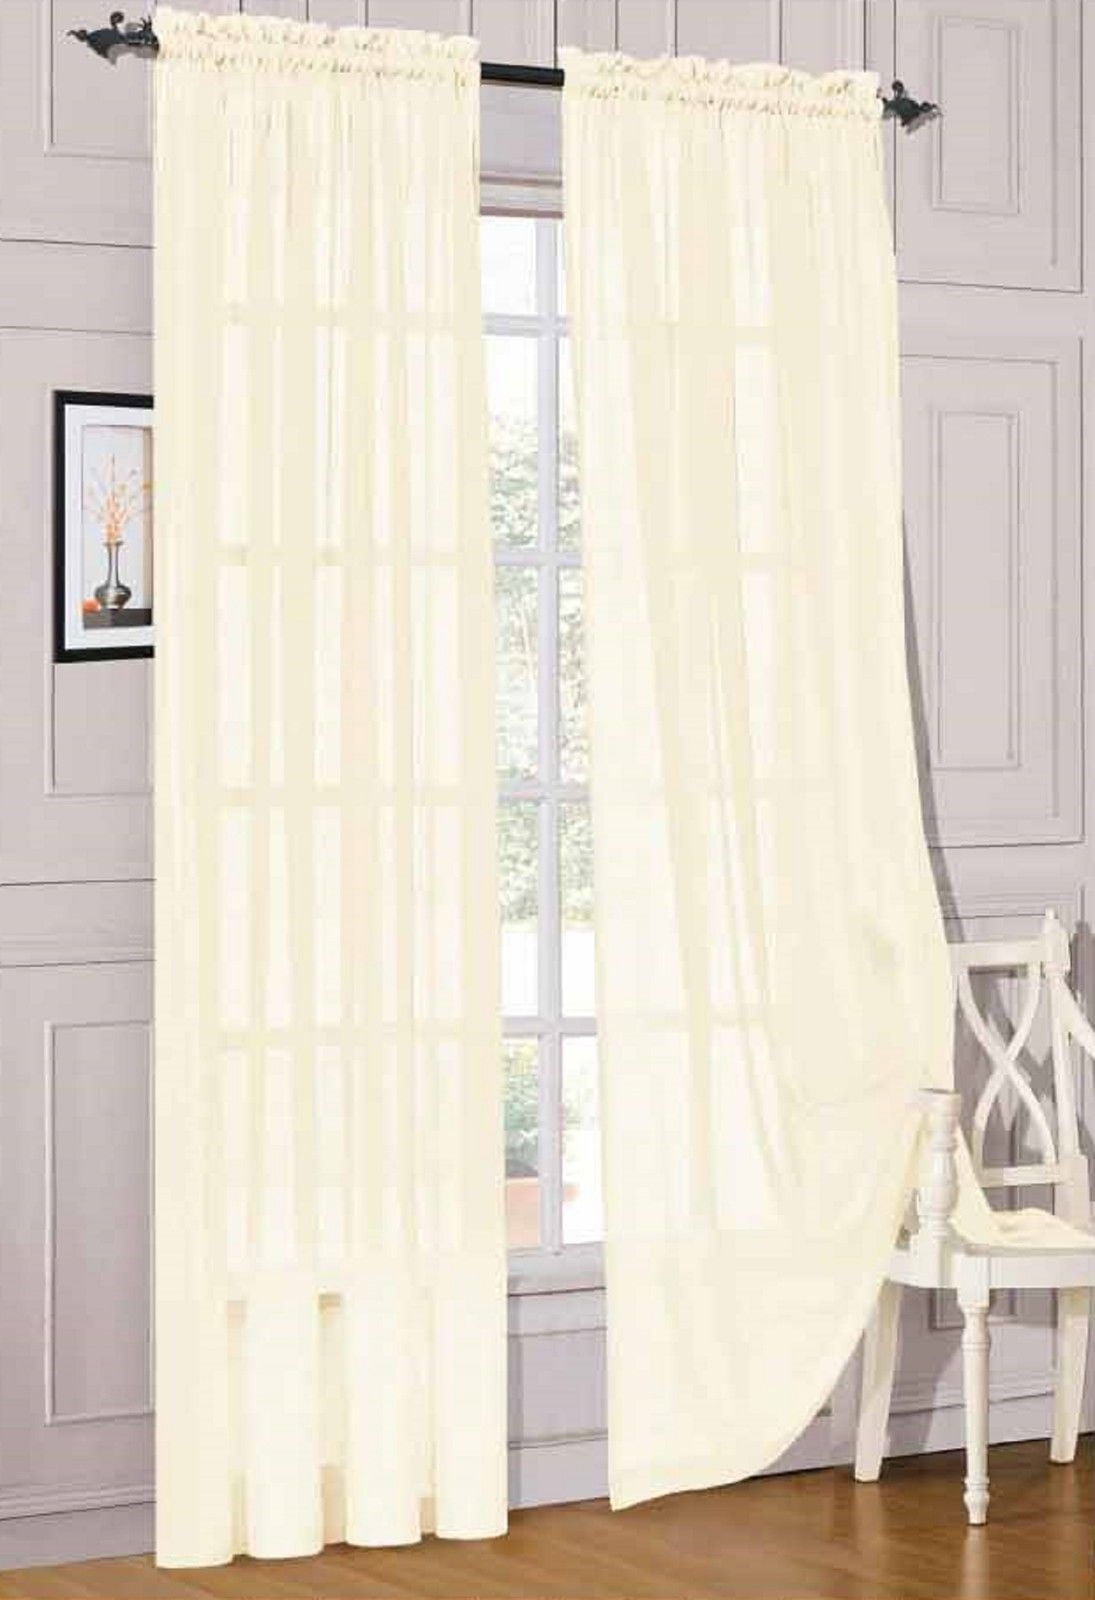 1pc sheer window curtain w/ rod pocket voile panel drape ivory color 84'' lenght 